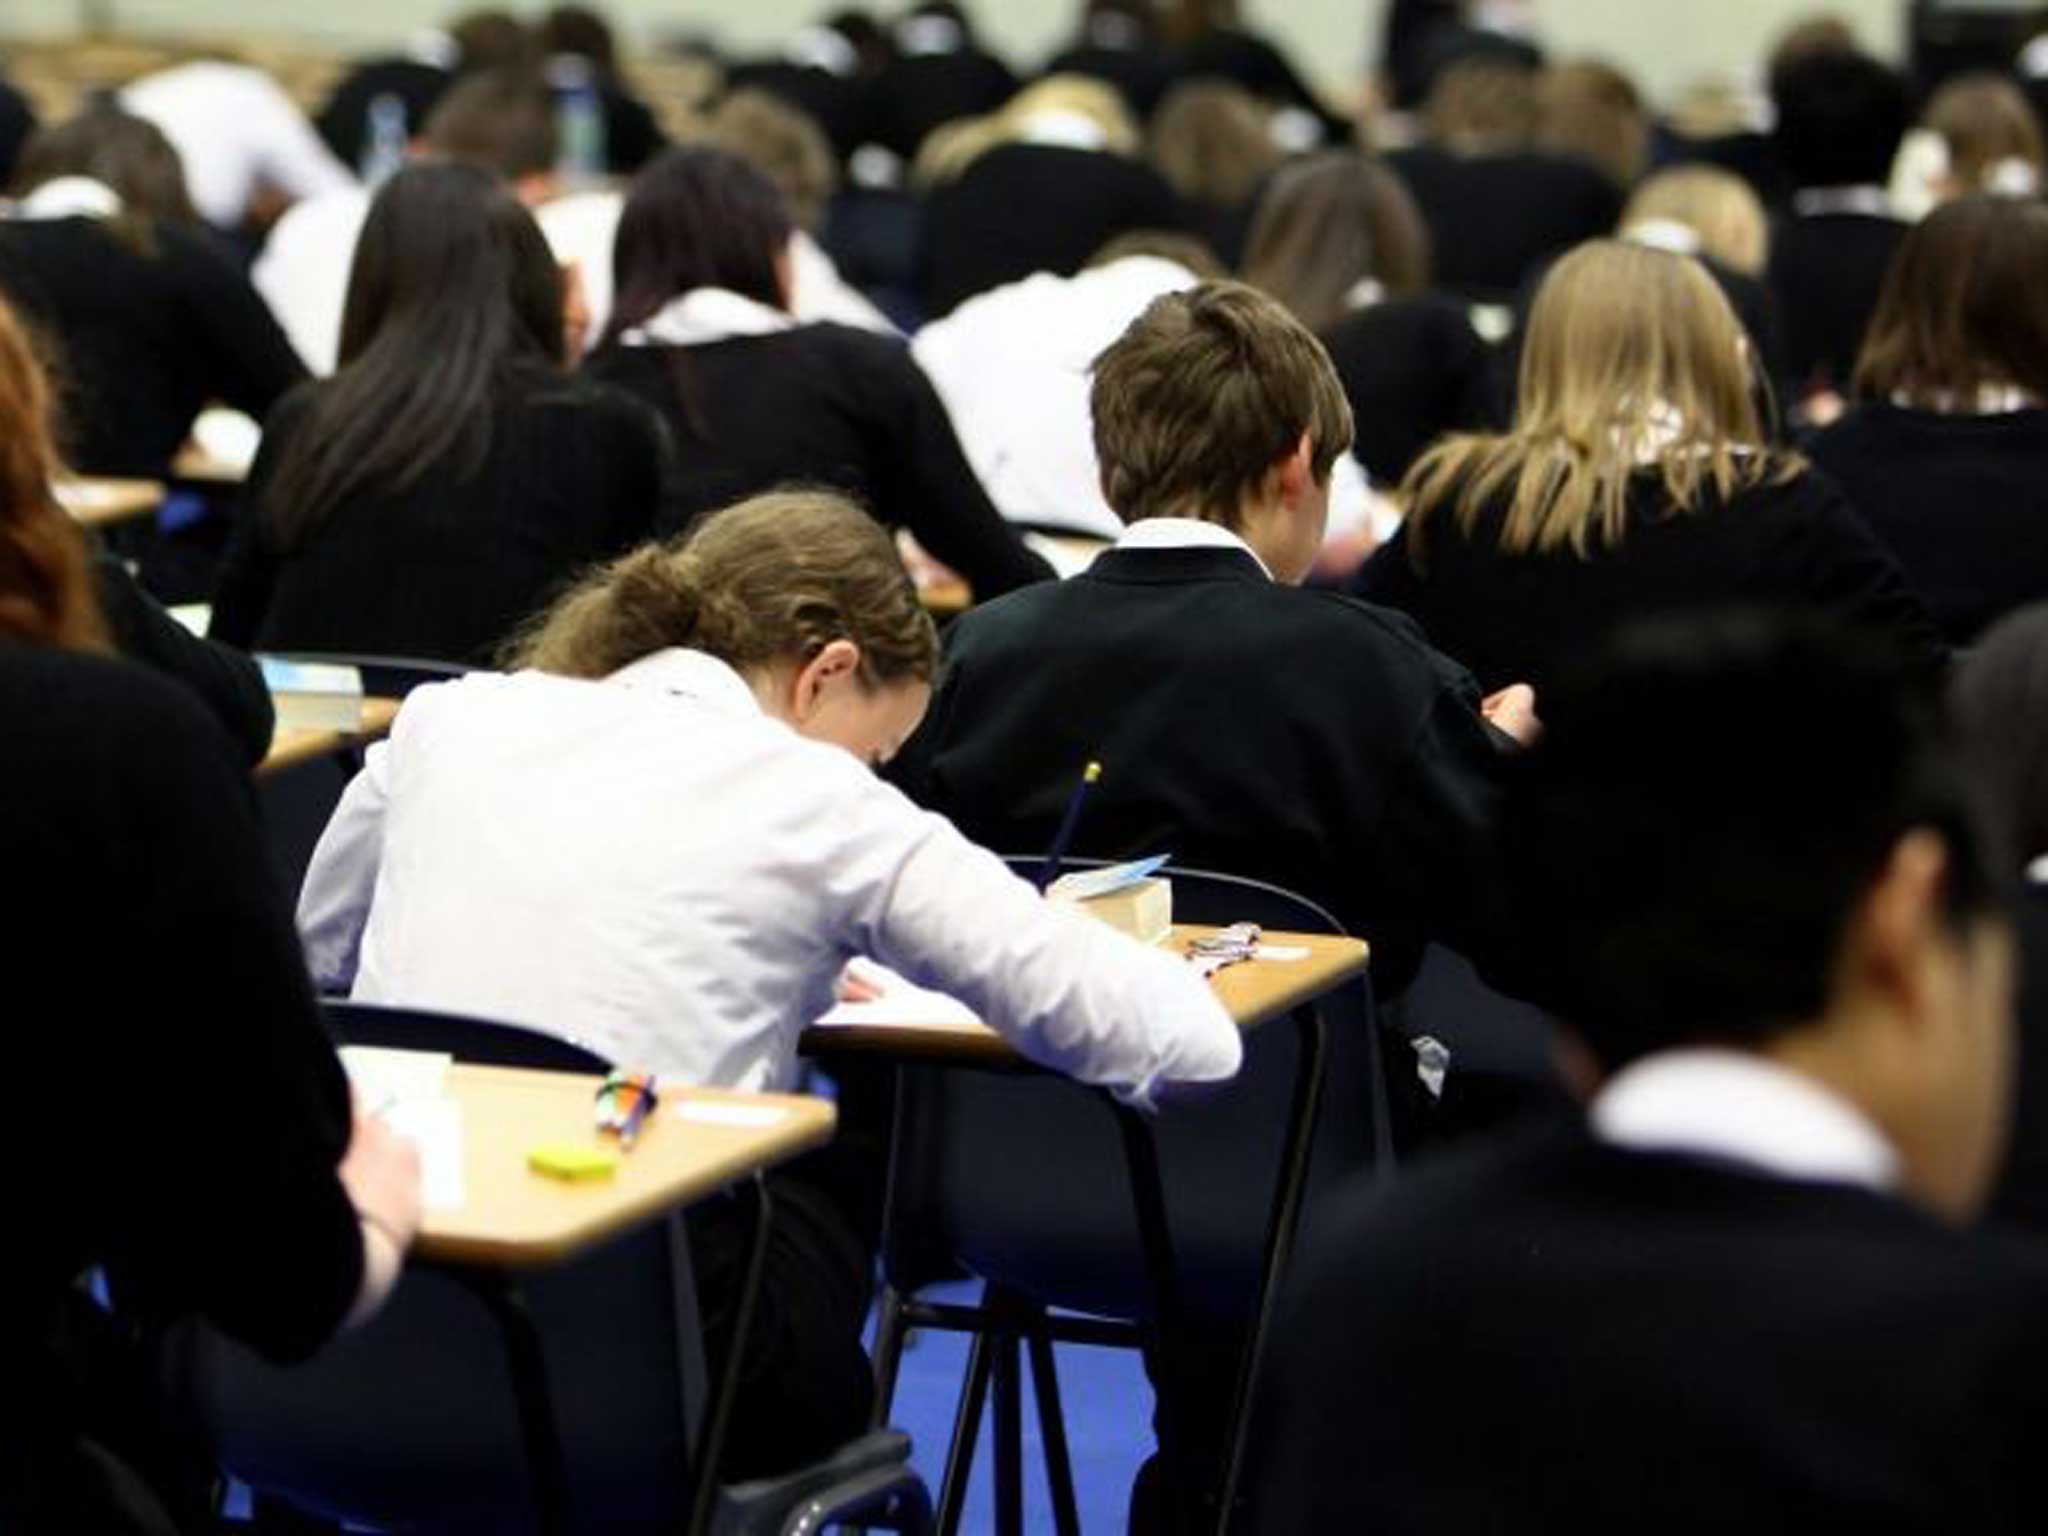 More than a third of teachers say they make pupils practice tests